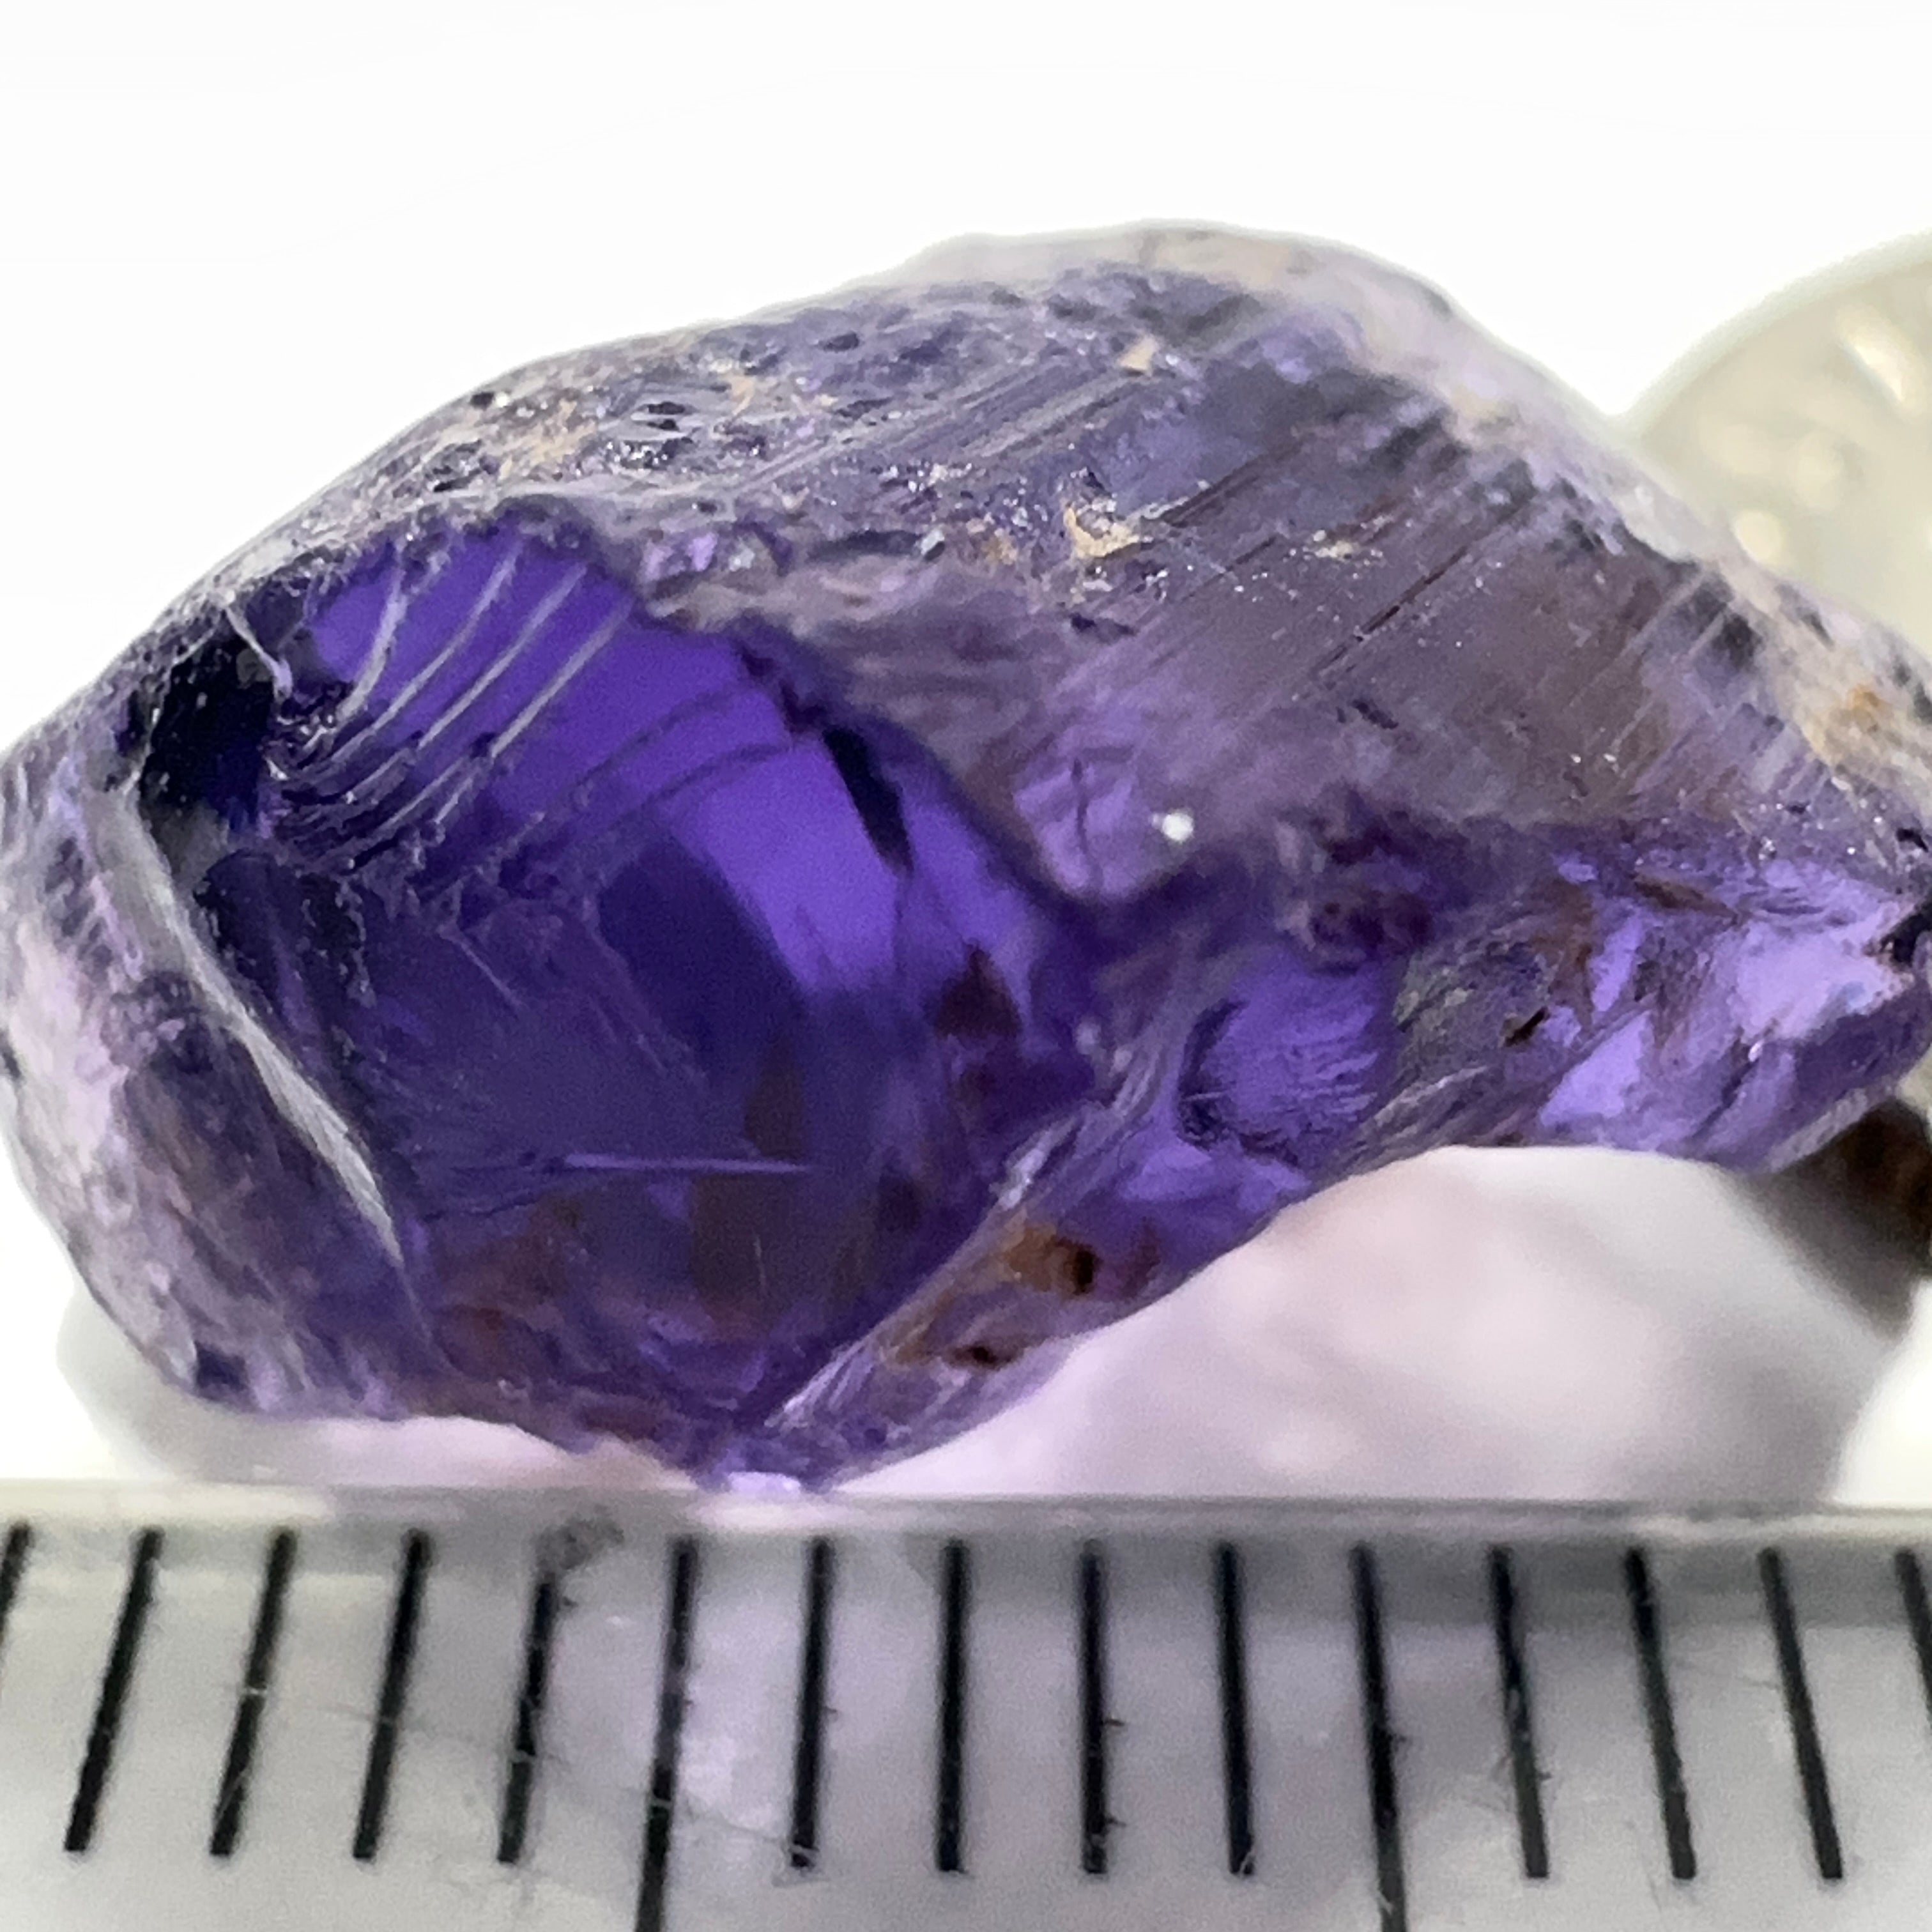 8.08ct Purple Scapolite Crystal, Tanzania, Untreated Untreated, VVS-IF clean